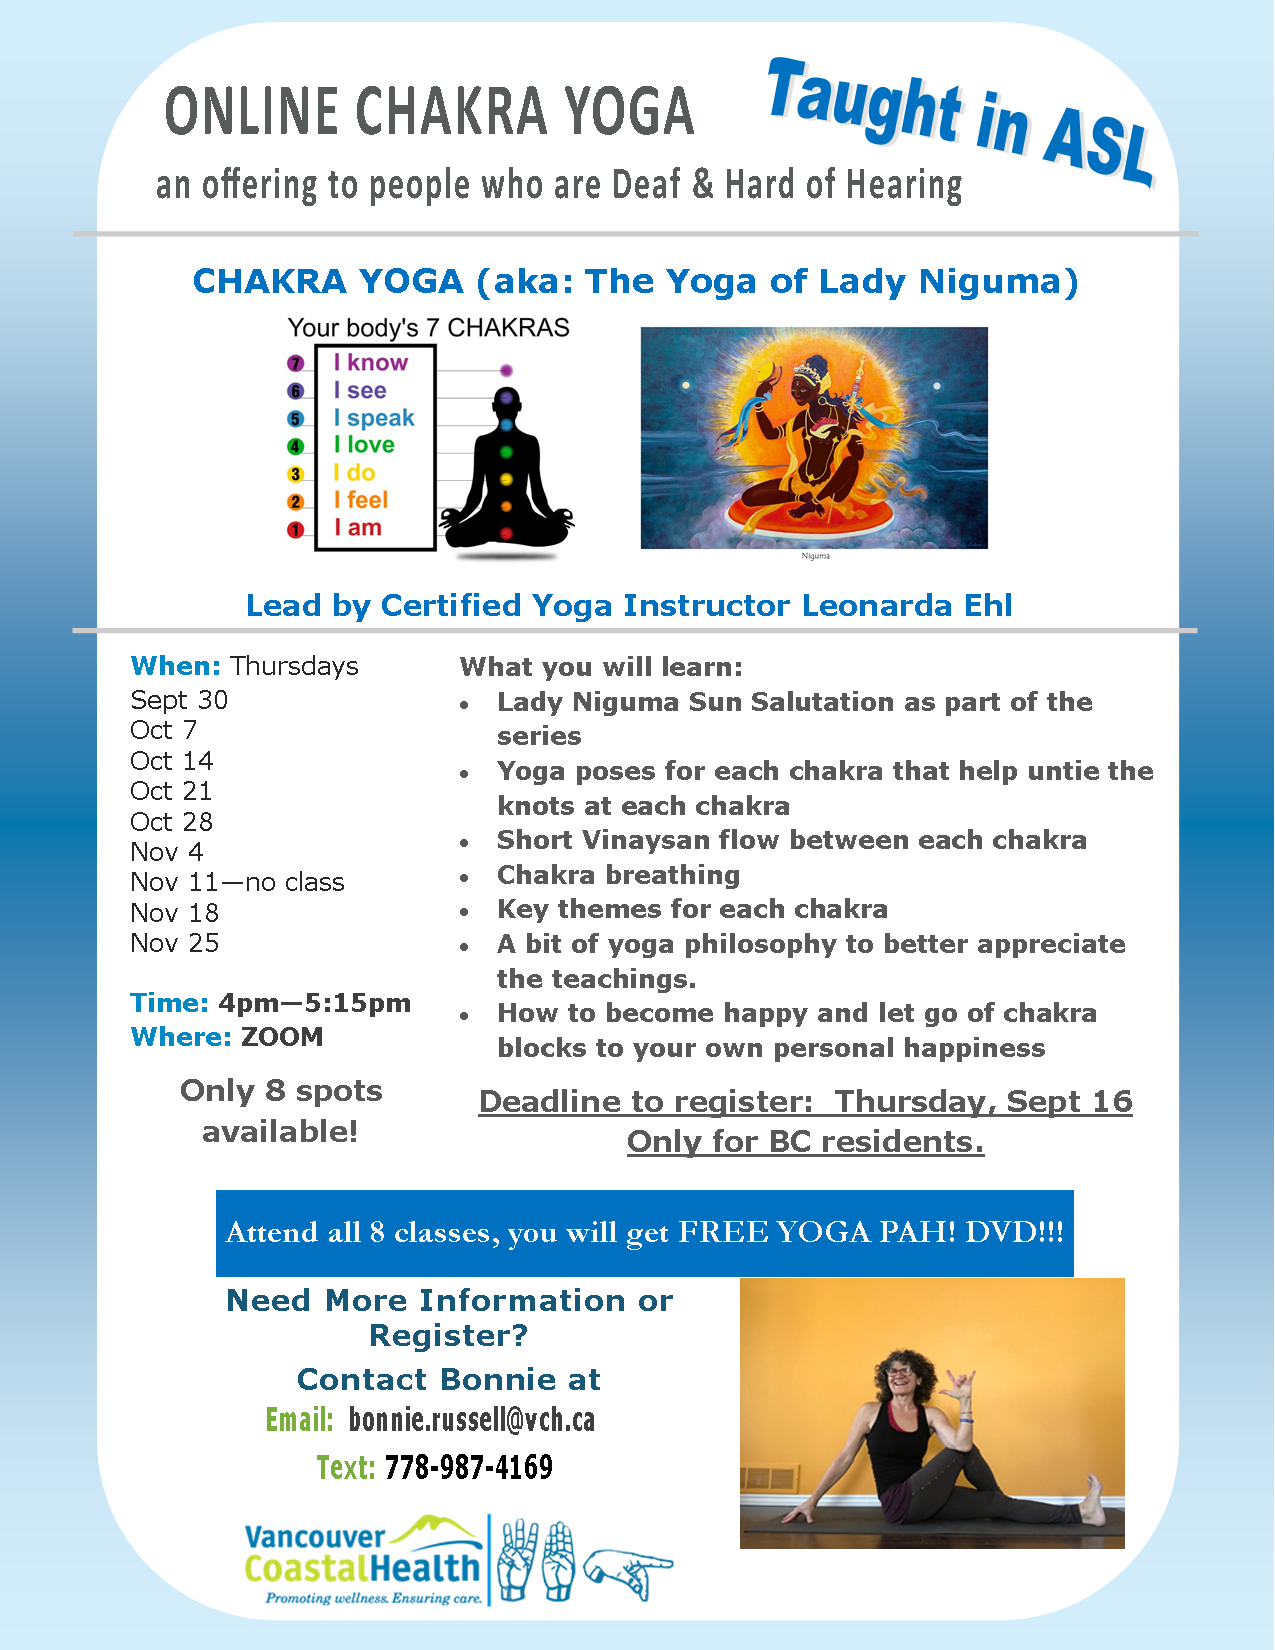 Flyer about Online Yoga Chakra in ASL